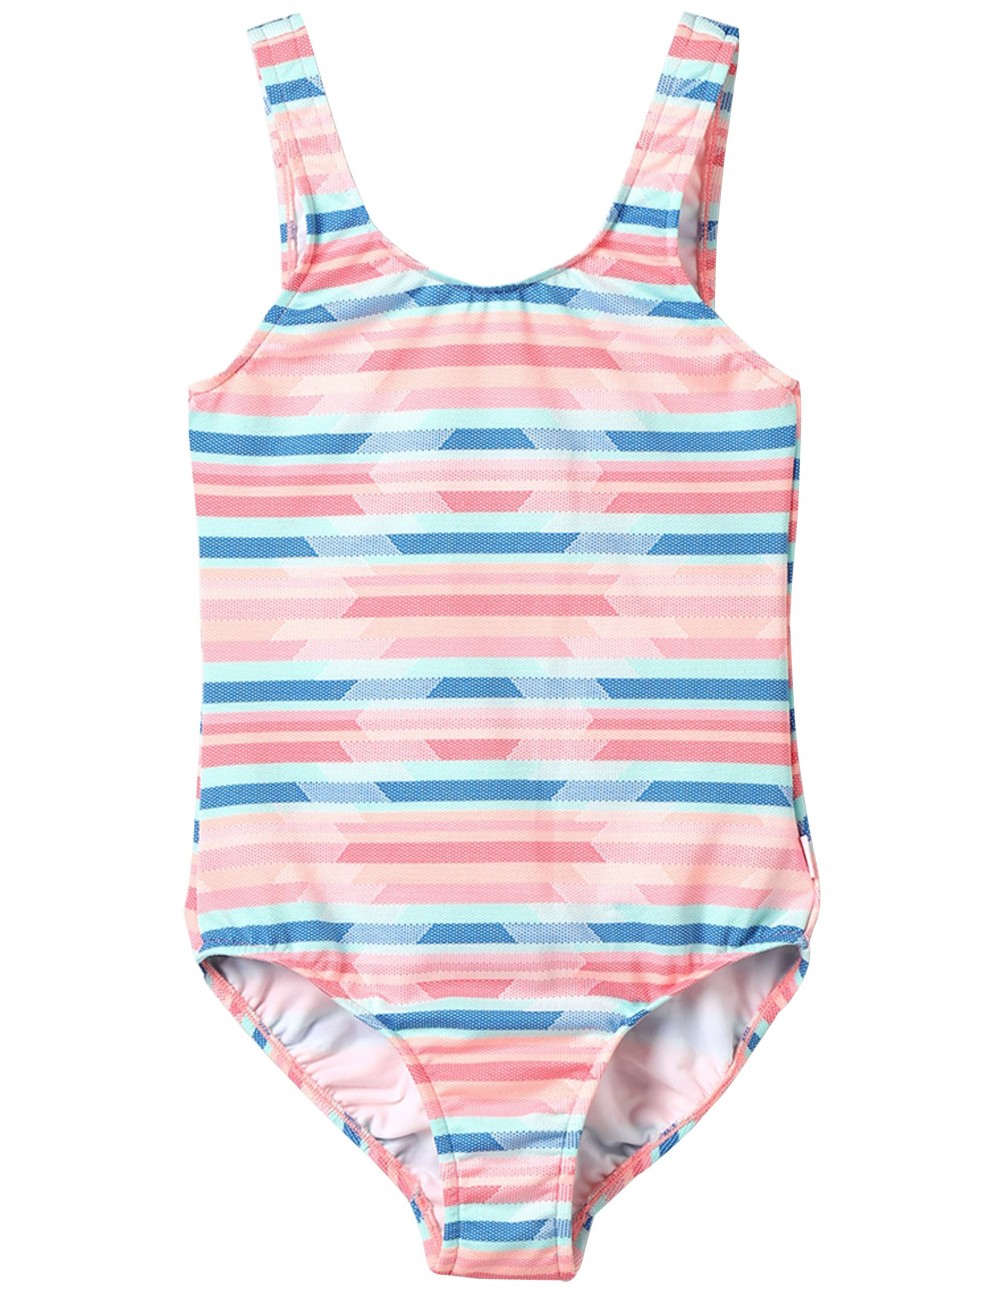 The Princess Ilou swimsuits and clothing for girls (4)